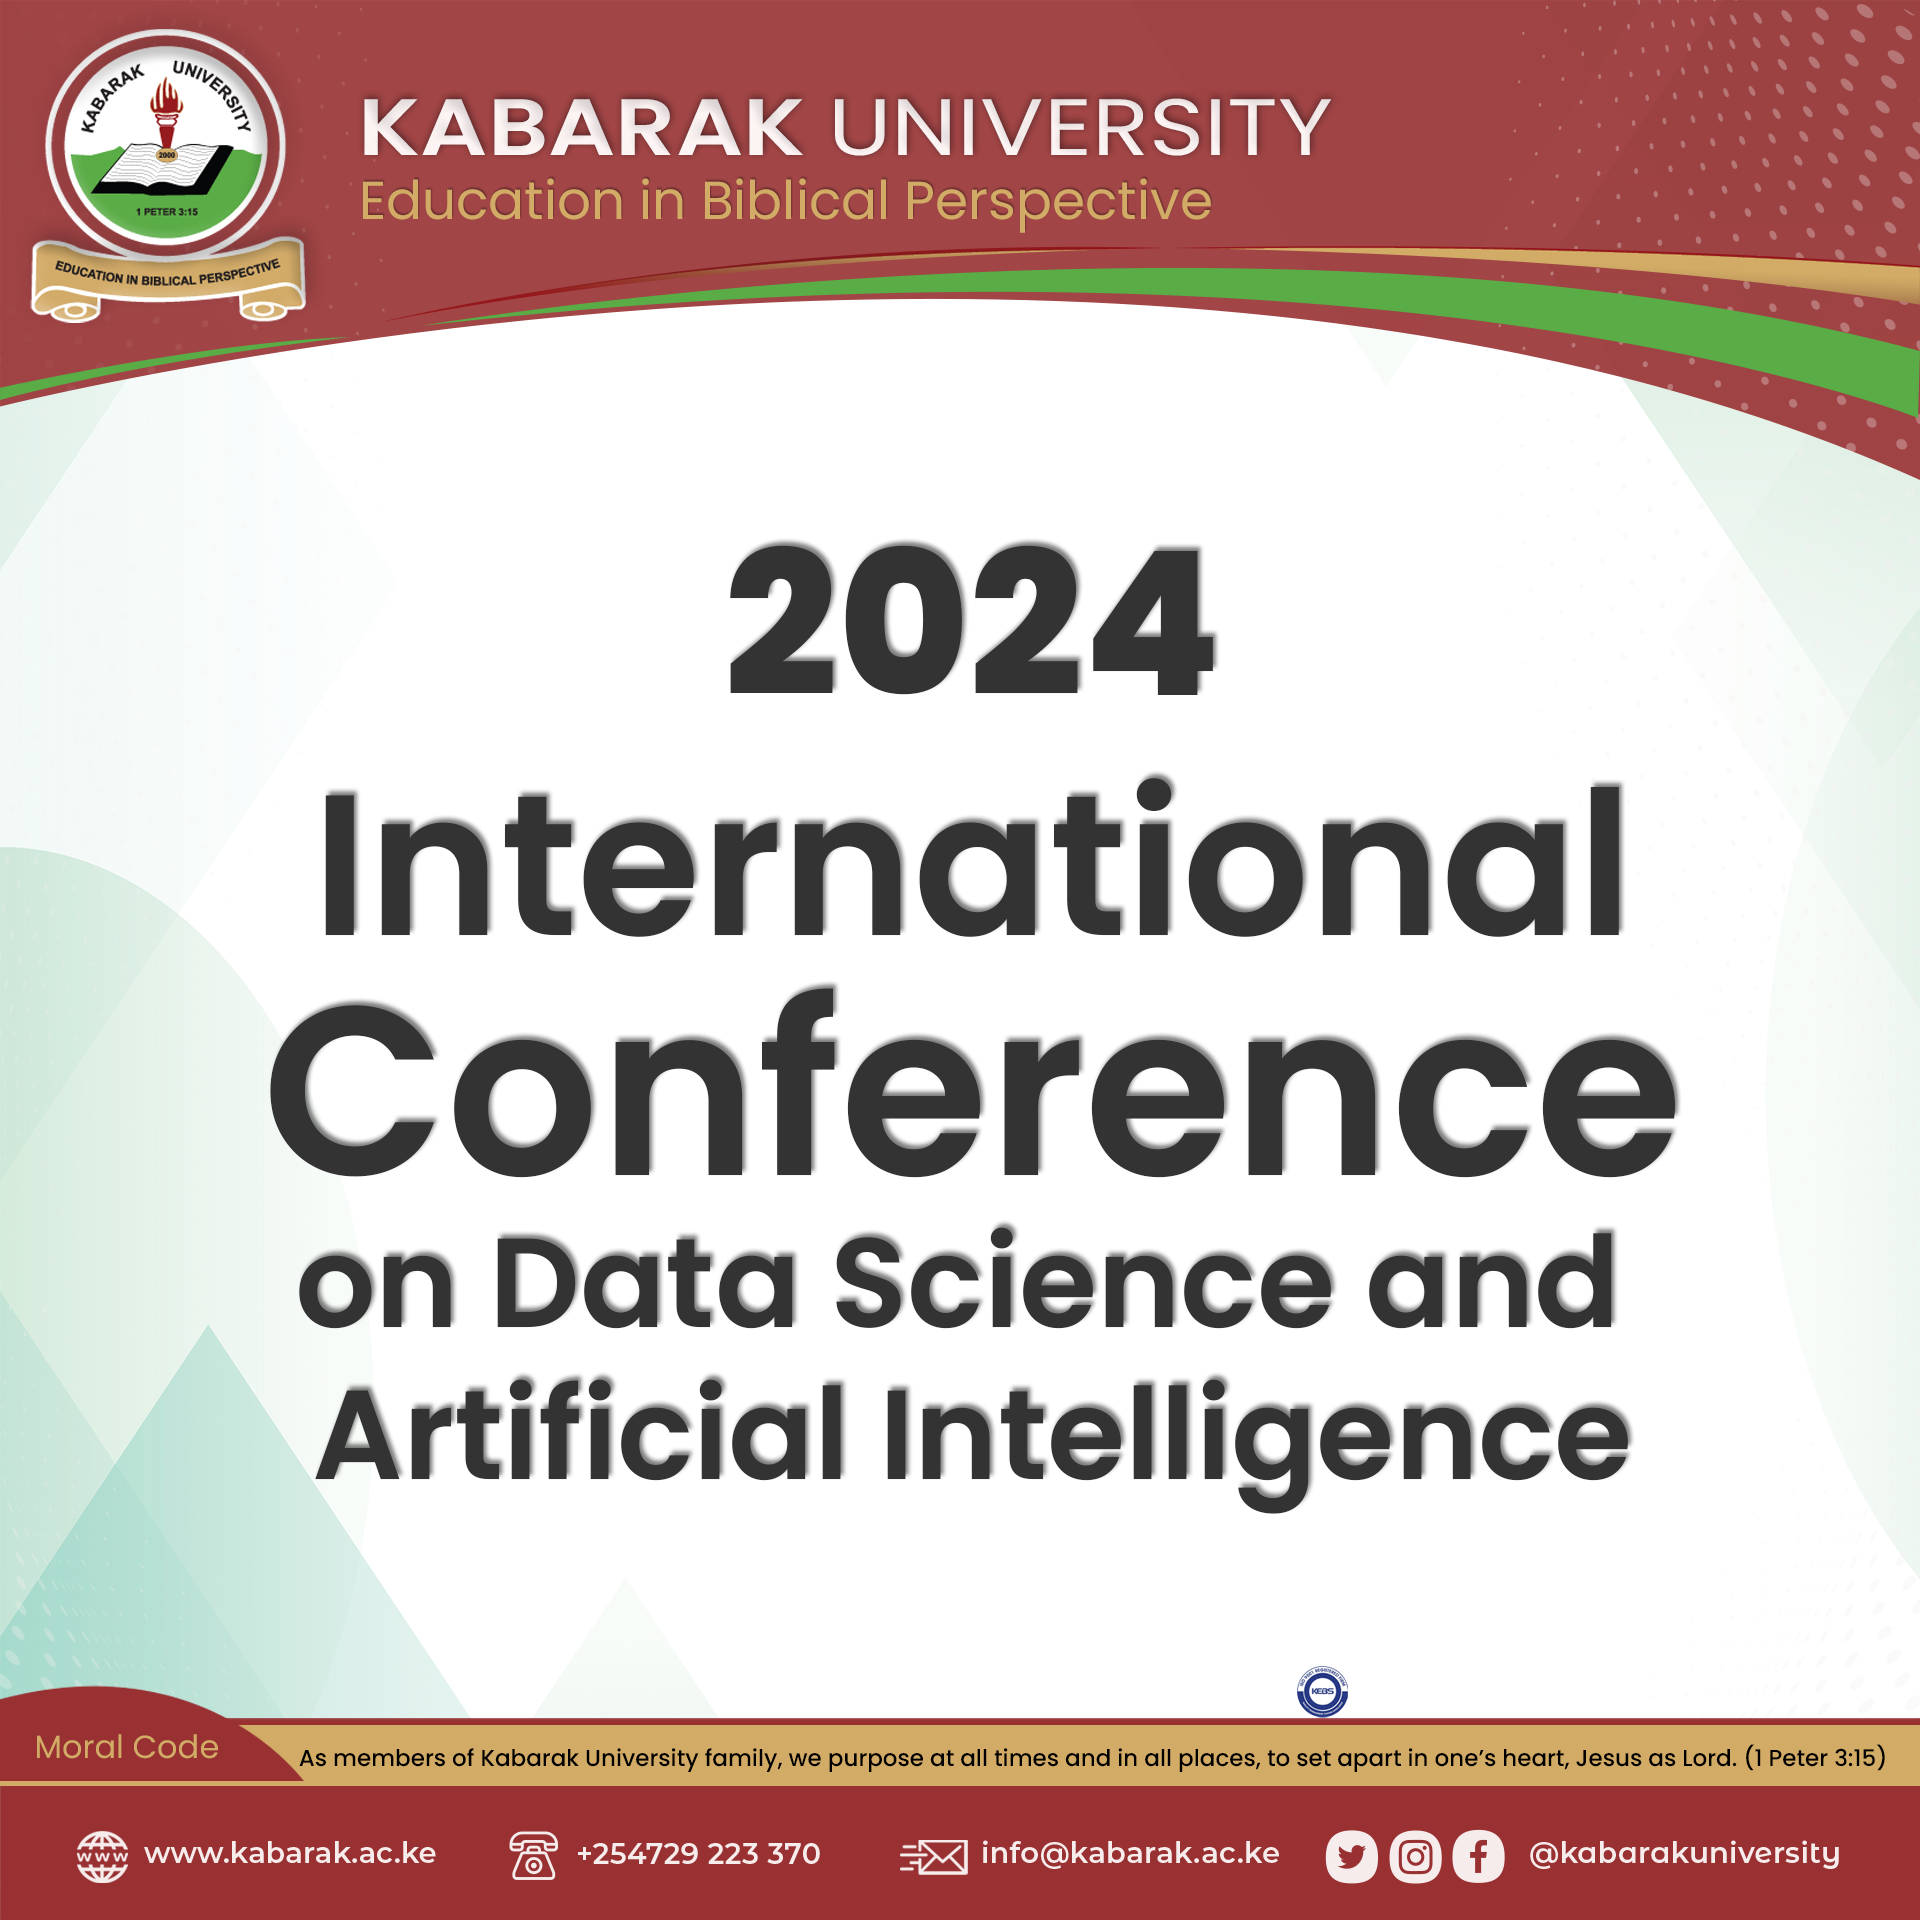 					View 2024: Kabarak University International Conference on Data Science and Artificial Intelligence 
				